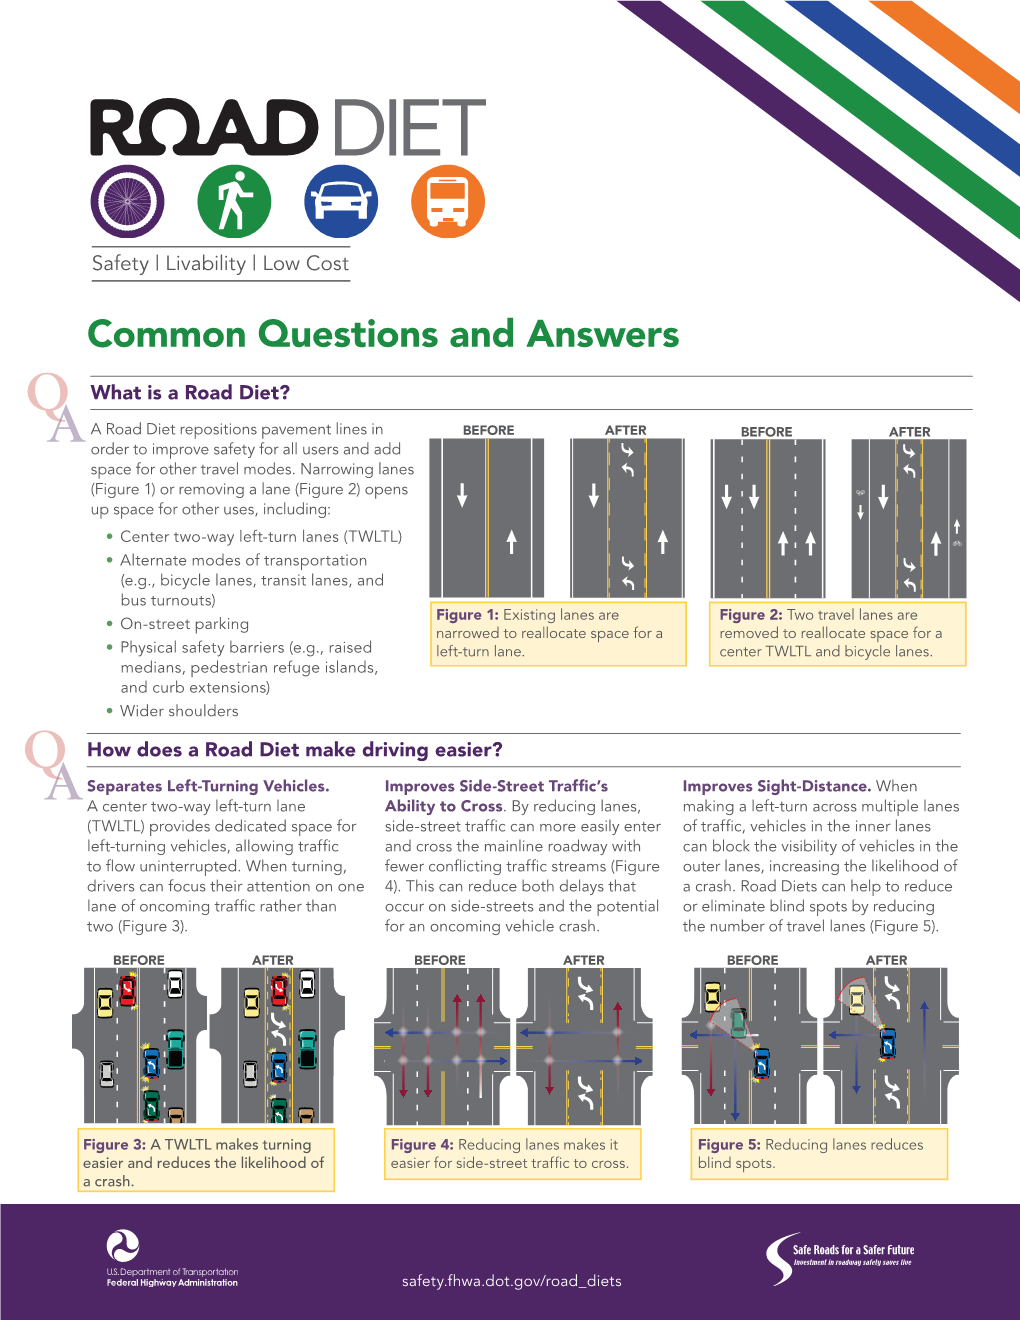 Road Diet: Common Questions and Answers